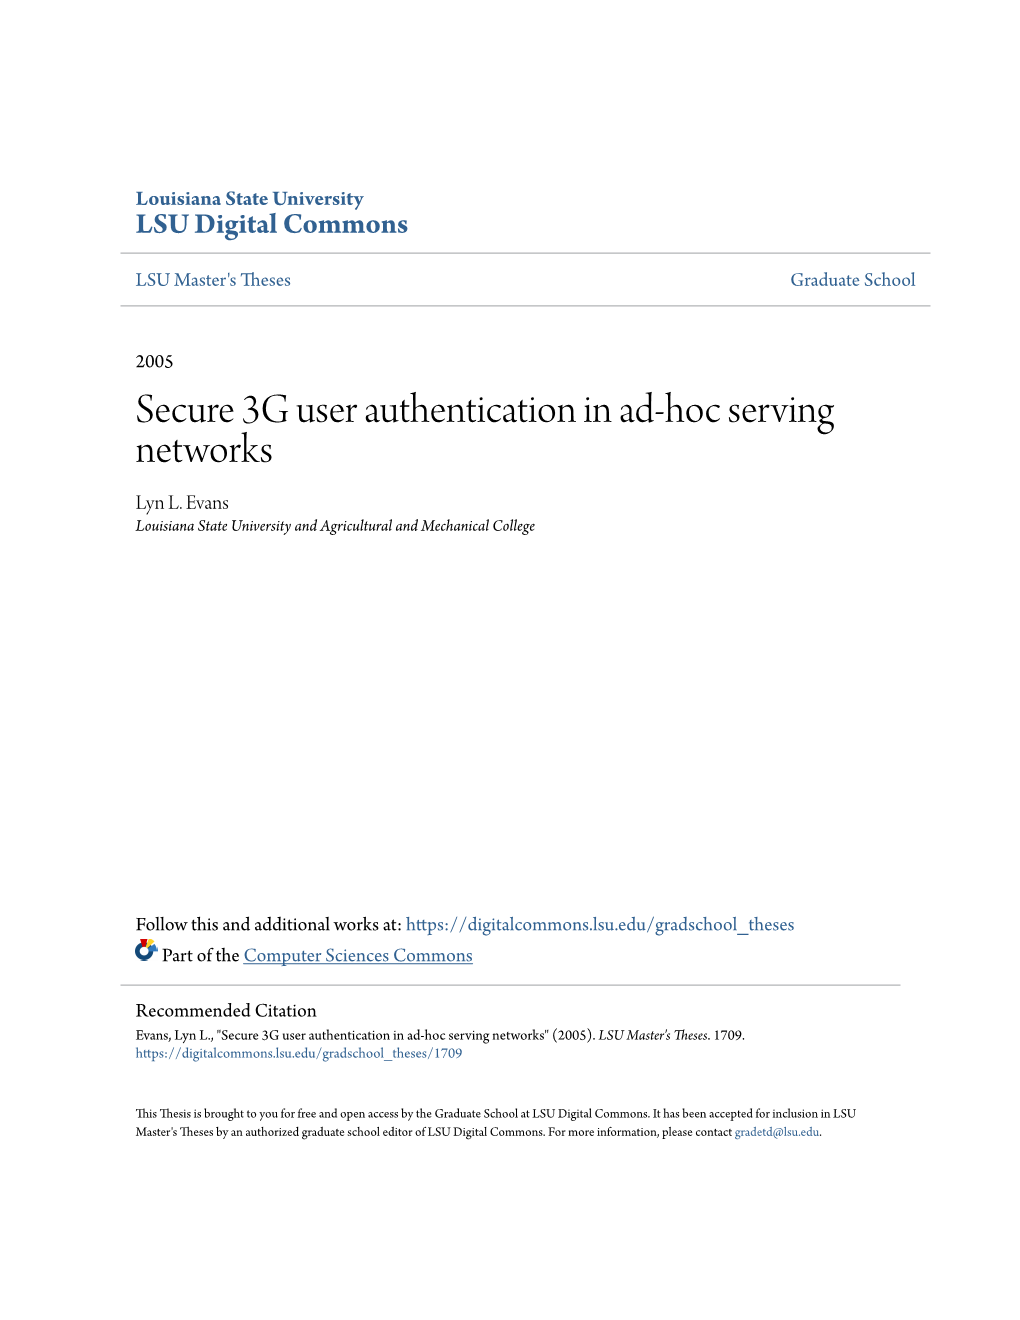 Secure 3G User Authentication in Ad-Hoc Serving Networks Lyn L